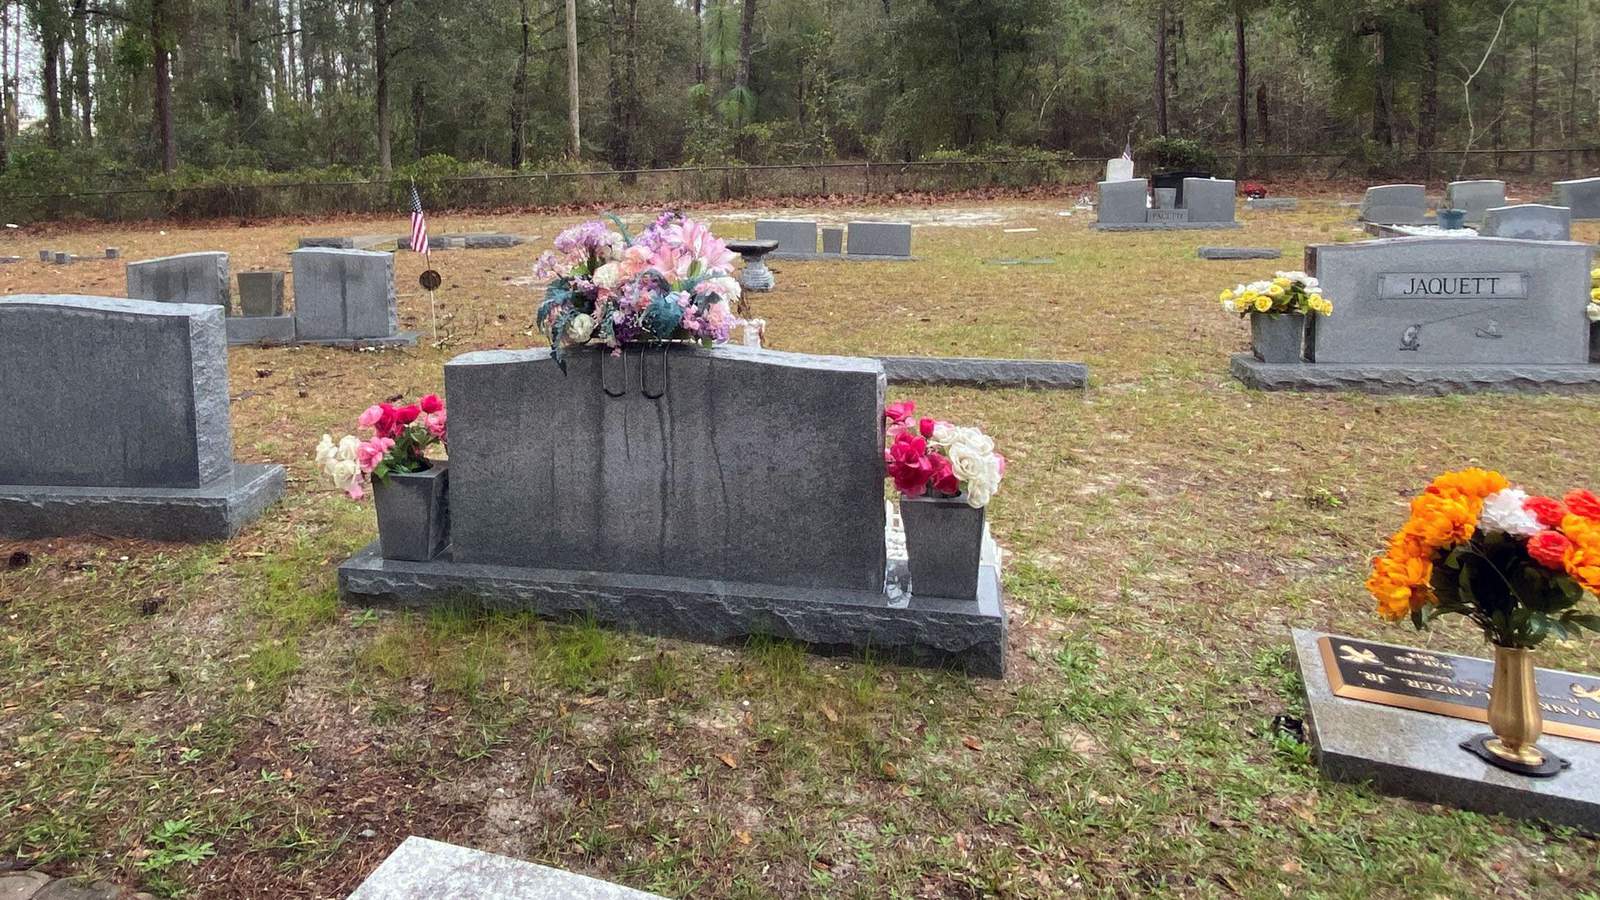 Plan would surround historic St. Johns County cemetery with commercial buildings